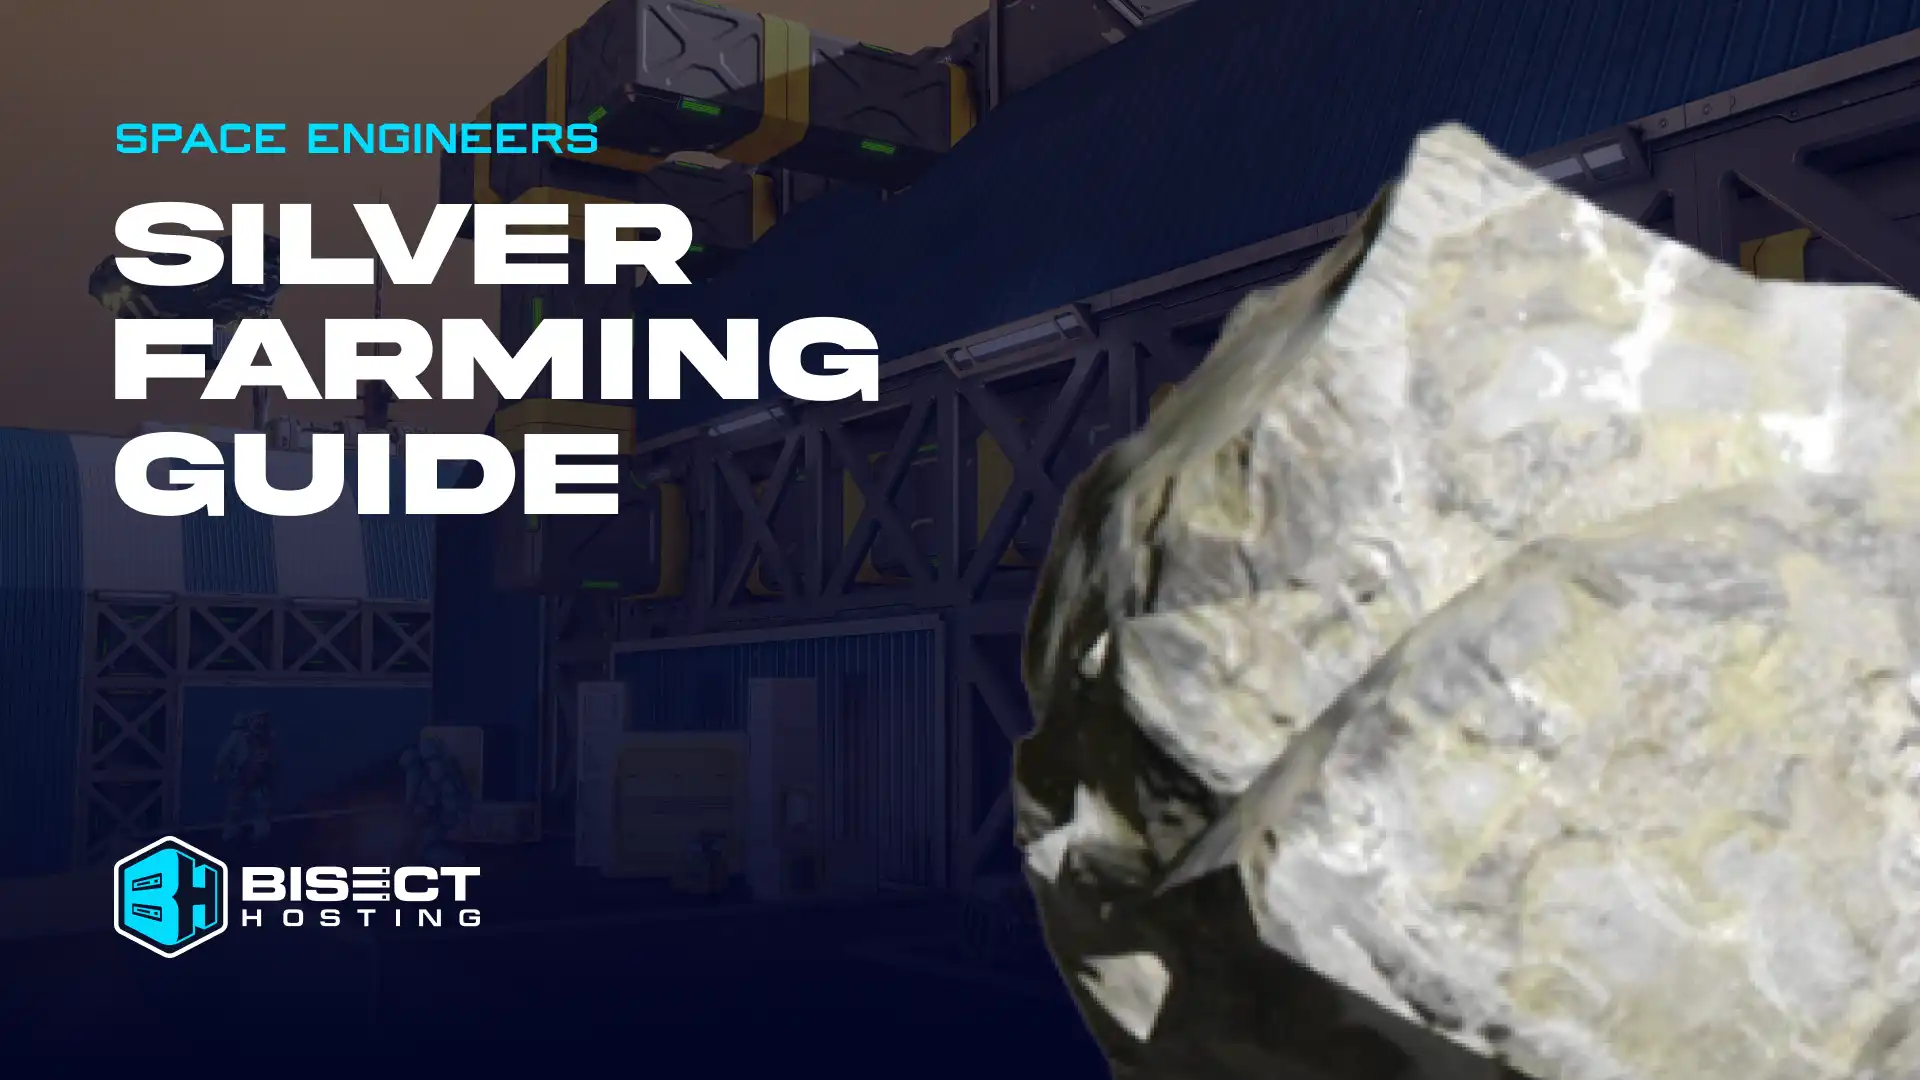 Space Engineers Silver Farming Guide: Locations, Appearance, & Crafting Recipes